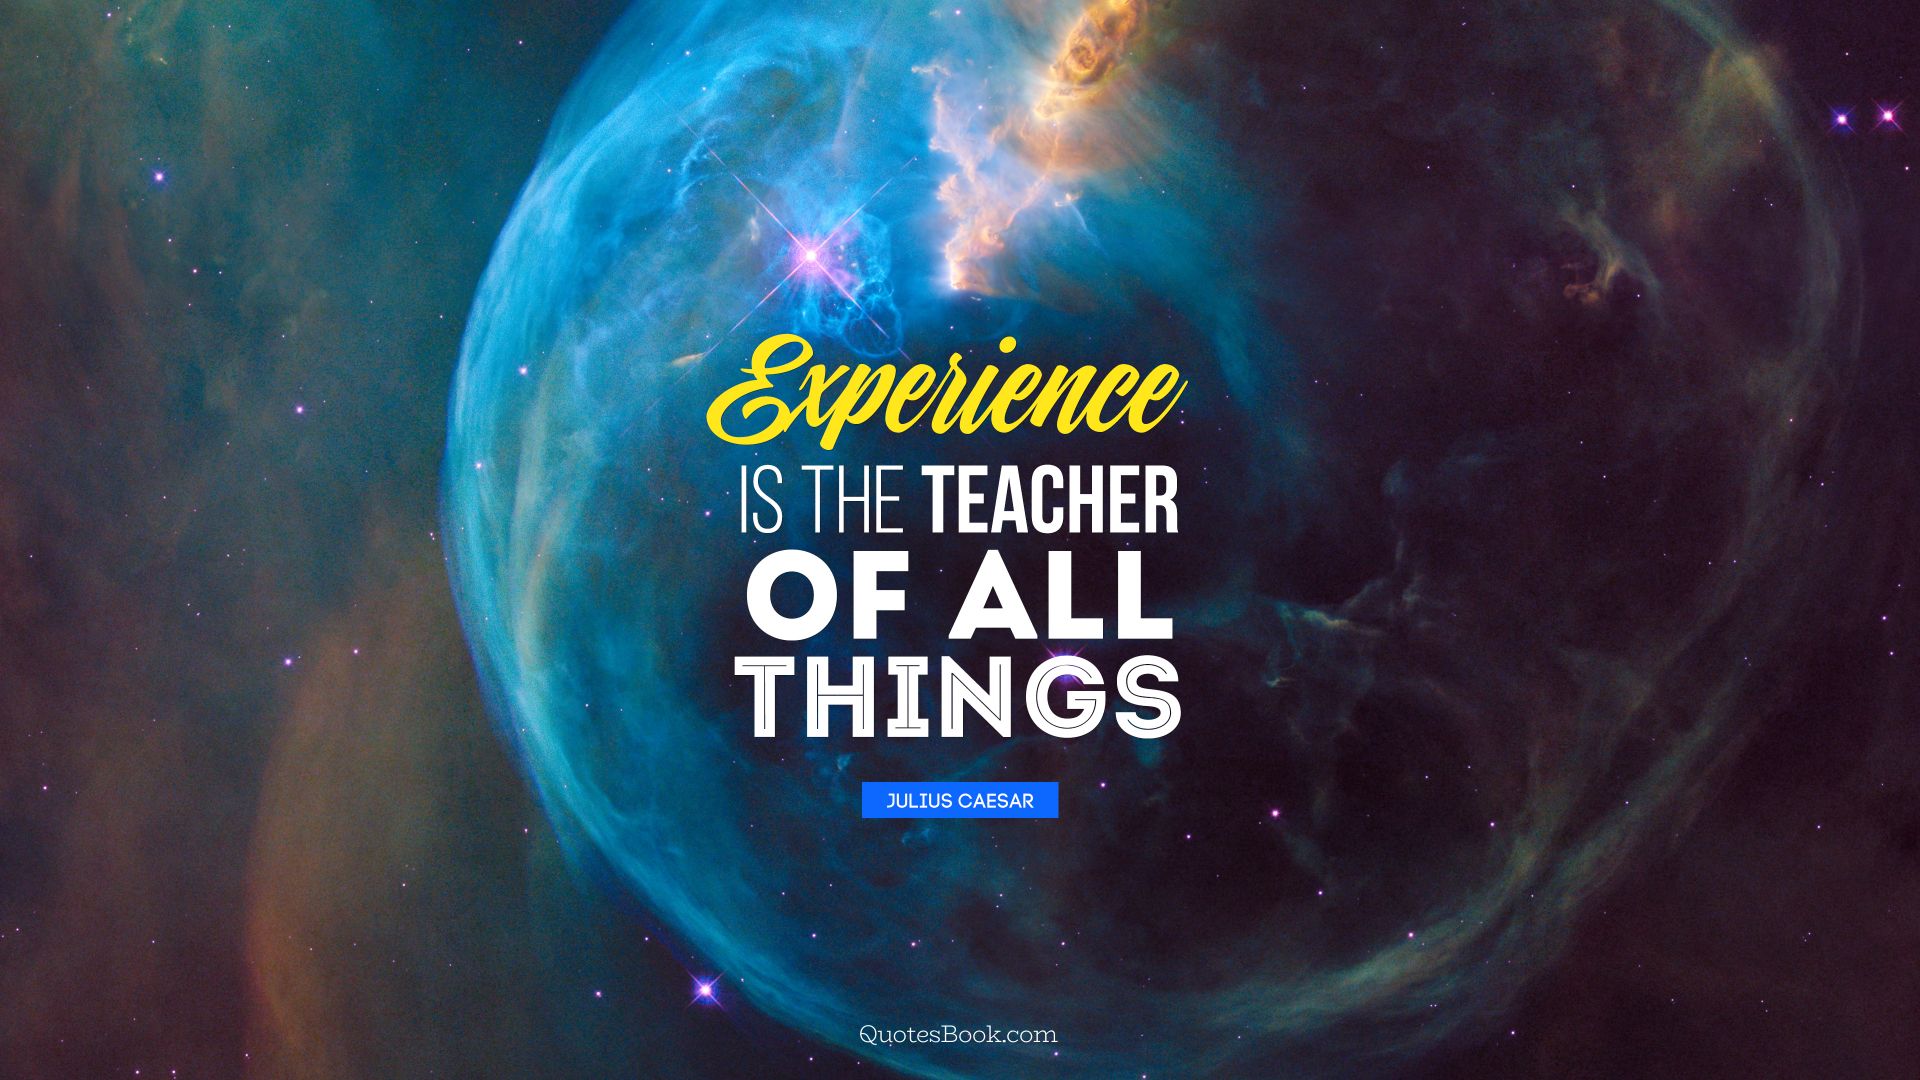 Experience is the teacher of all things. - Quote by Julius Caesar